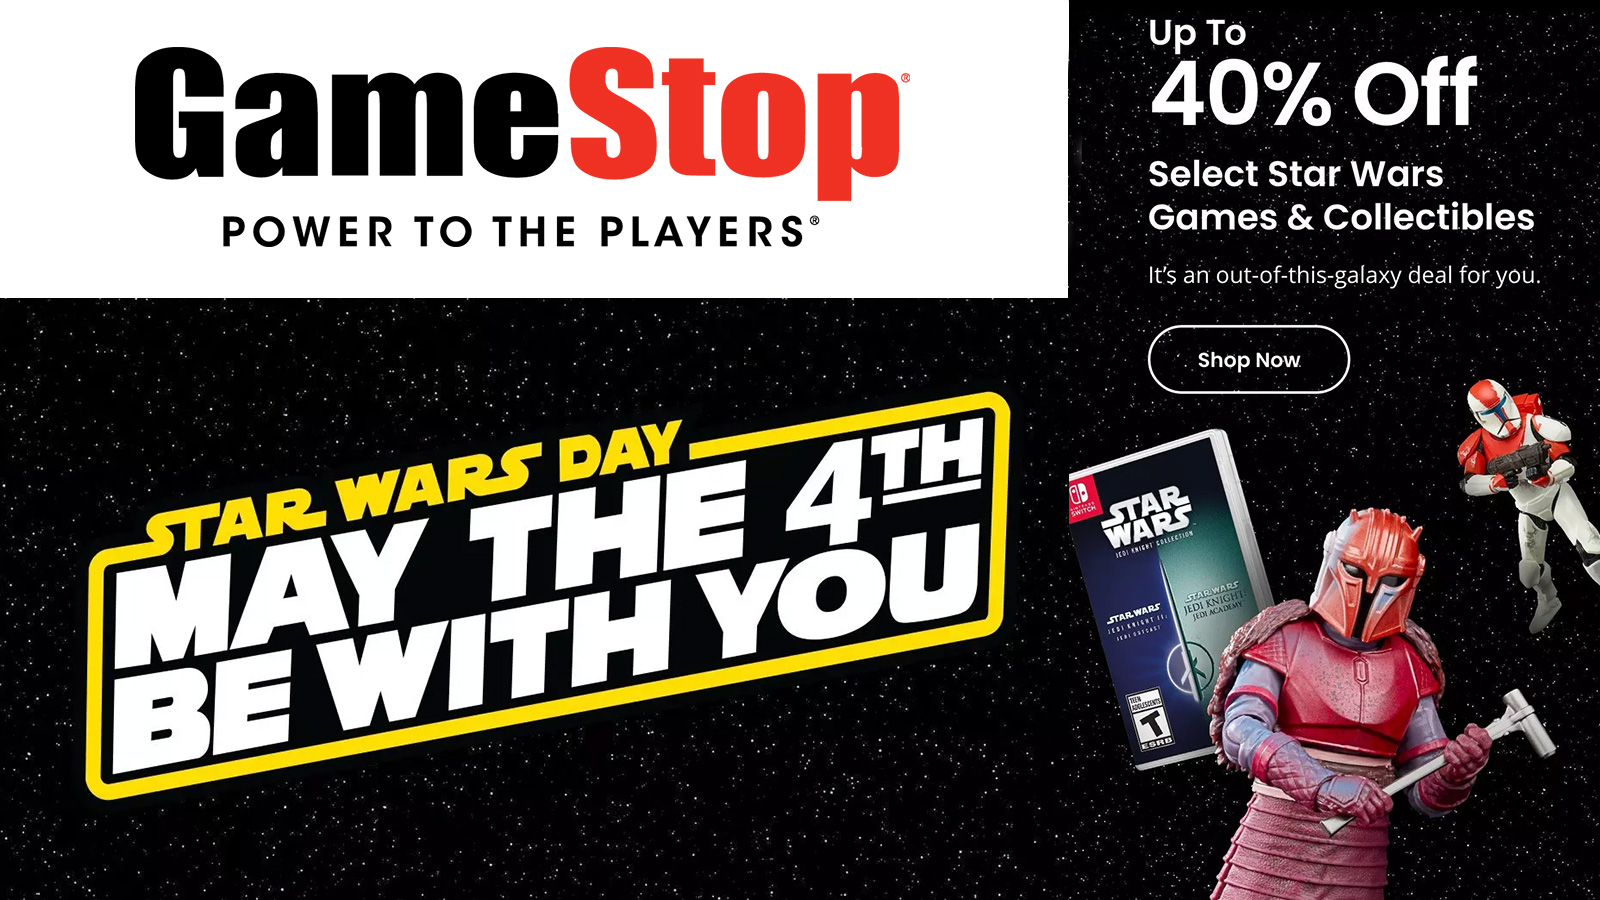 GameStop.com May The 4th Be With You Sale - Up To 40% Off Toys, Games, Clothing, And ETC